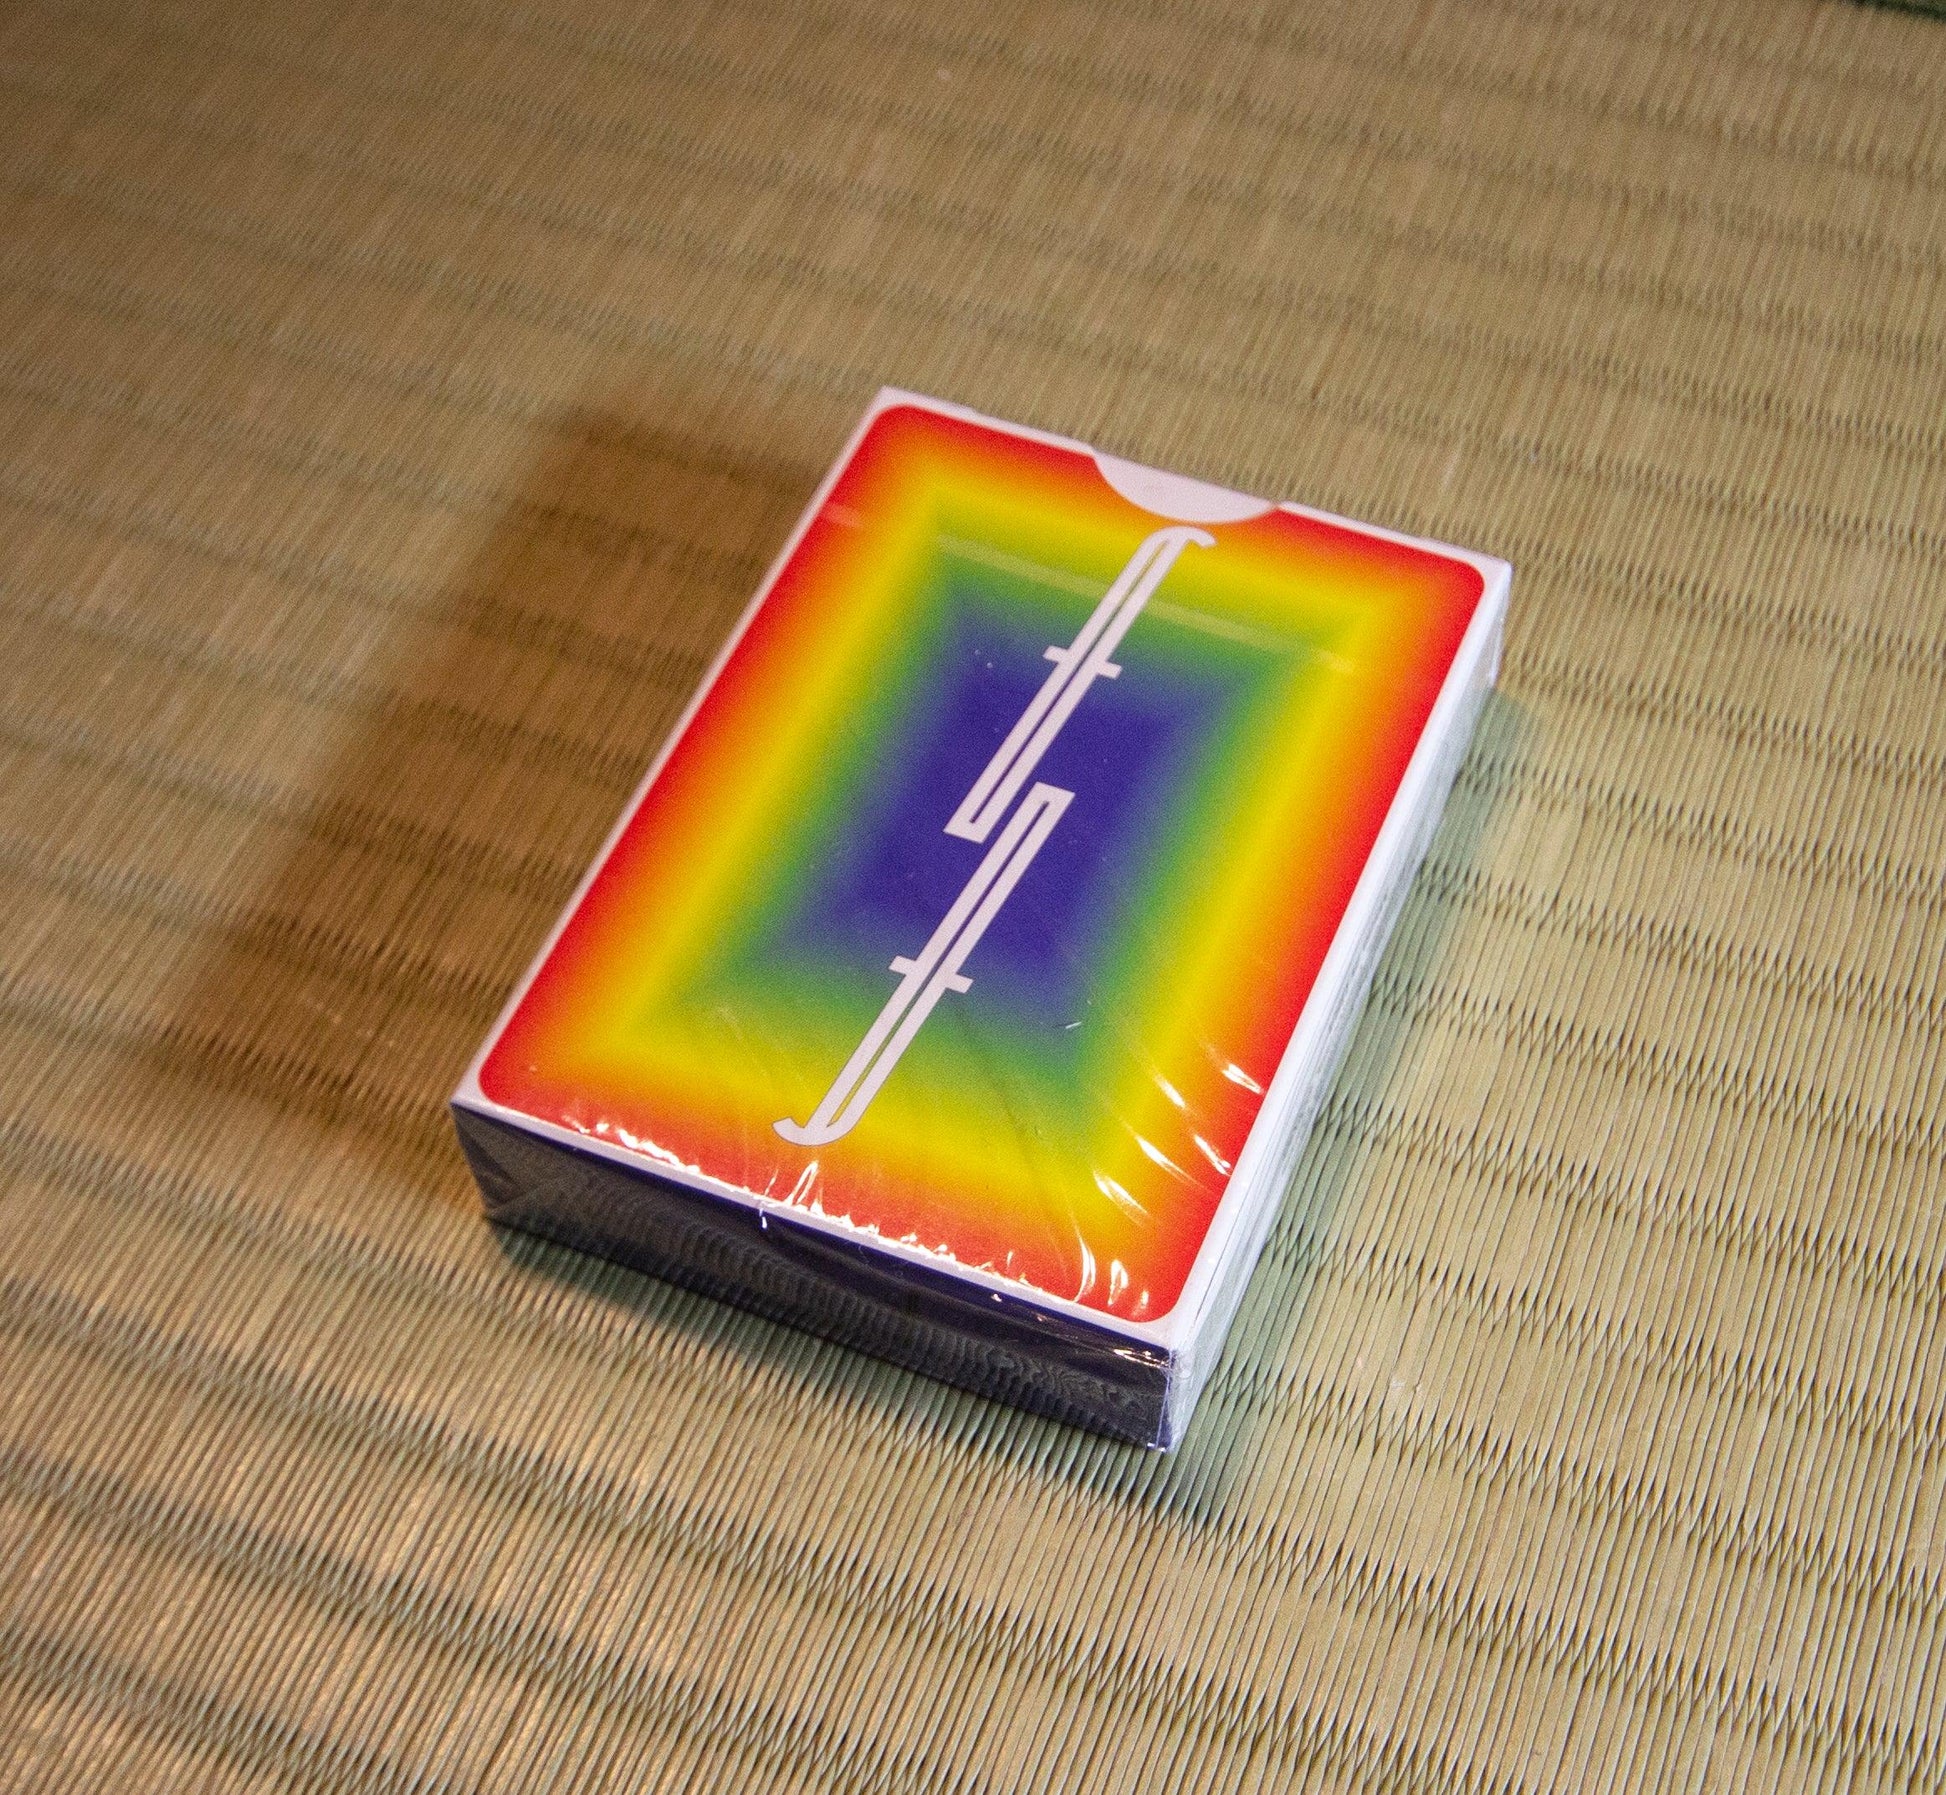 Heat Vision Fontaine Playing Cards by Fontaine Cards - Deckita Decks